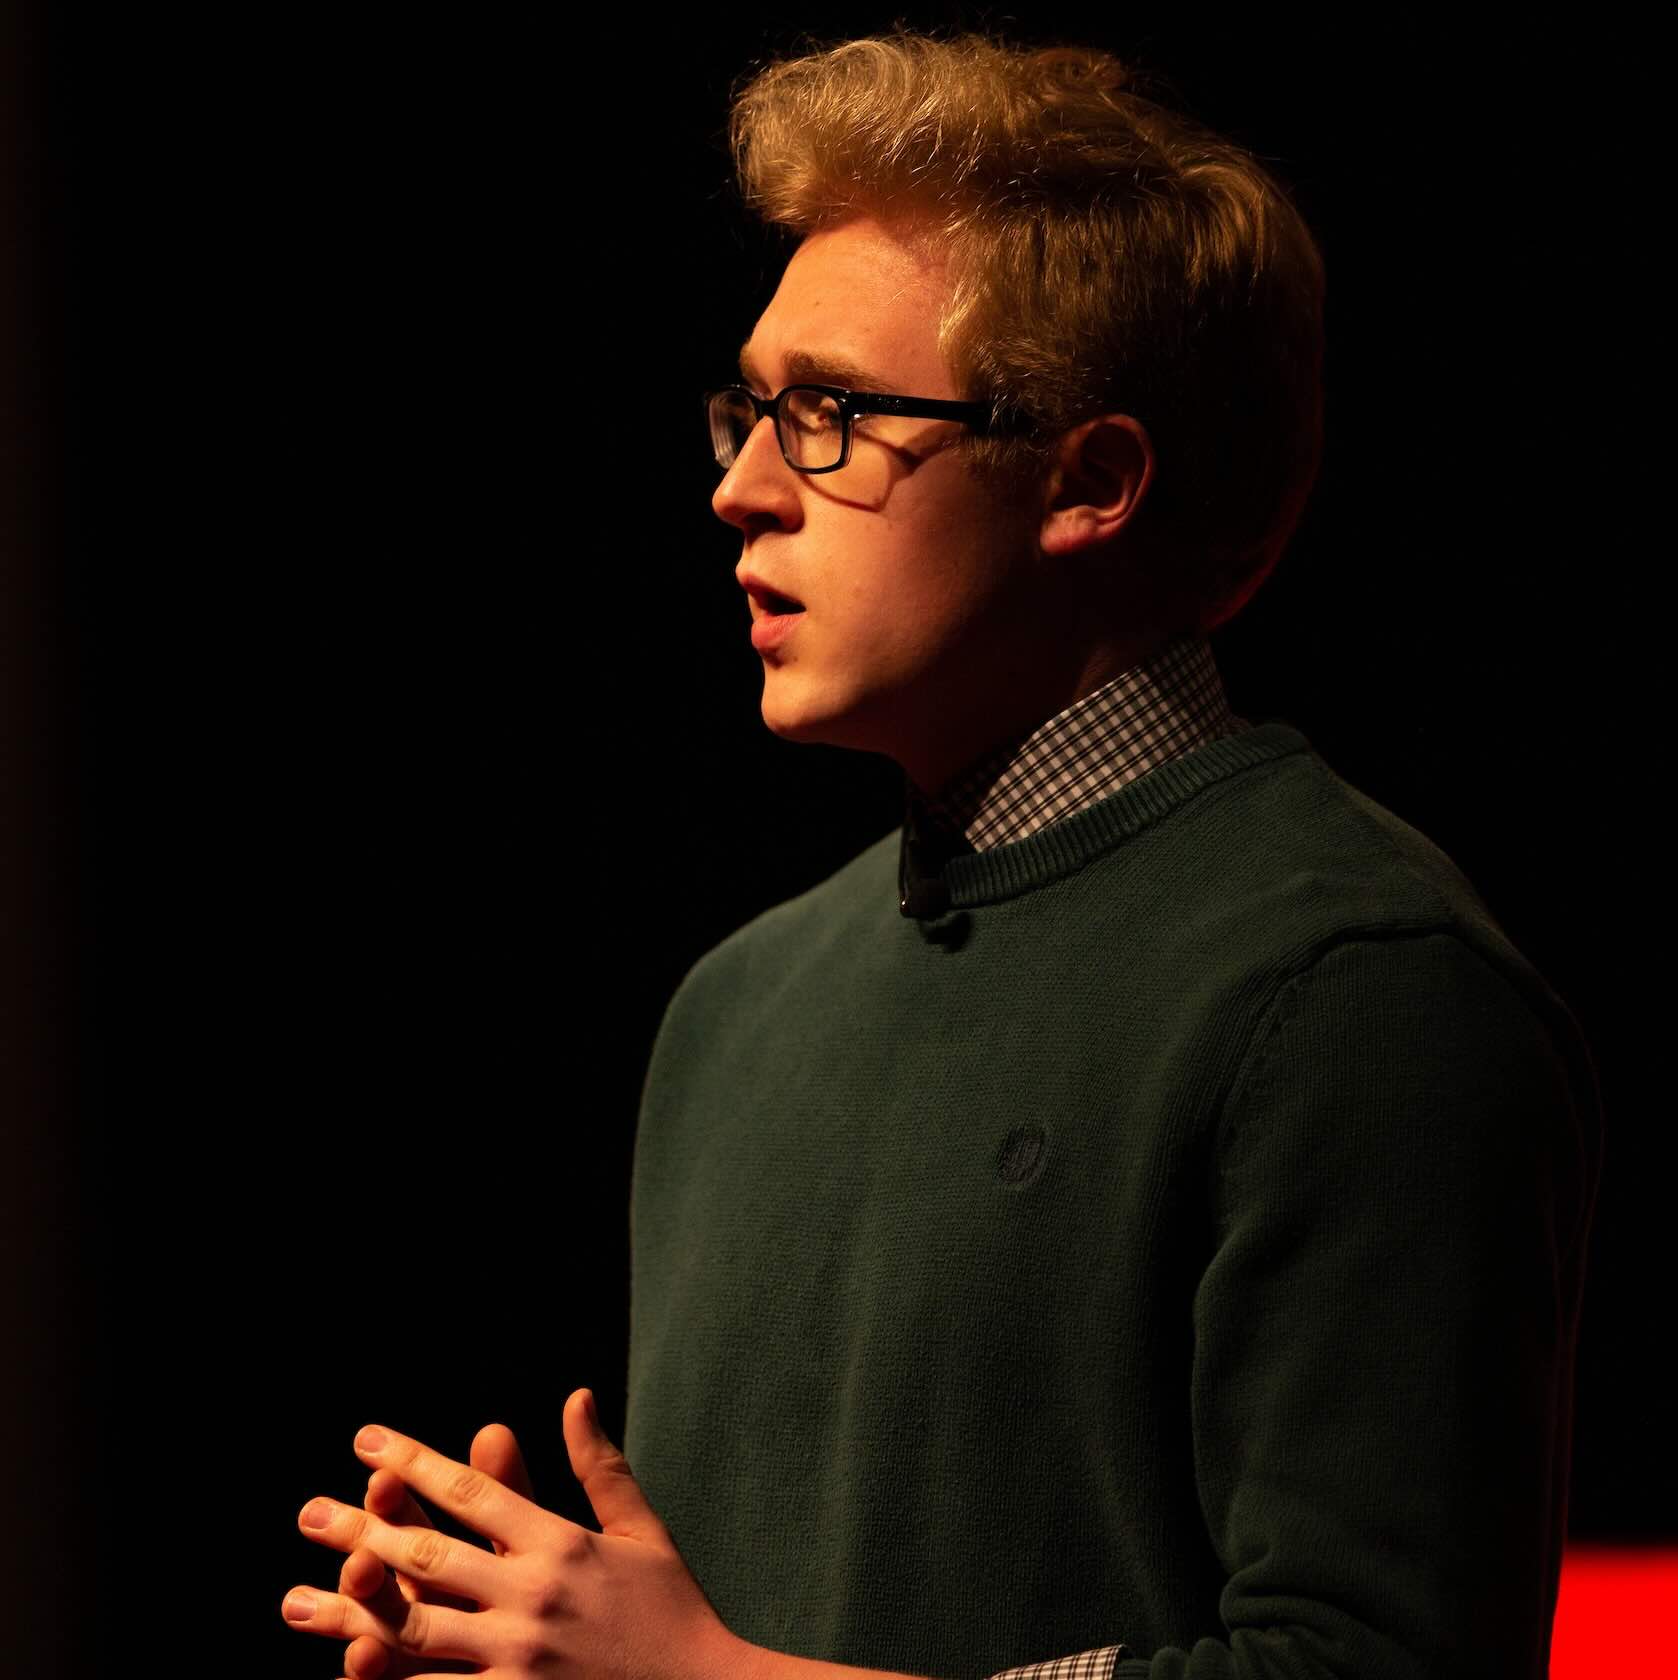 alumnus Daniel Owens '23 speaking to an audience out of frame during the TEDxValparaisoUniversity conference.